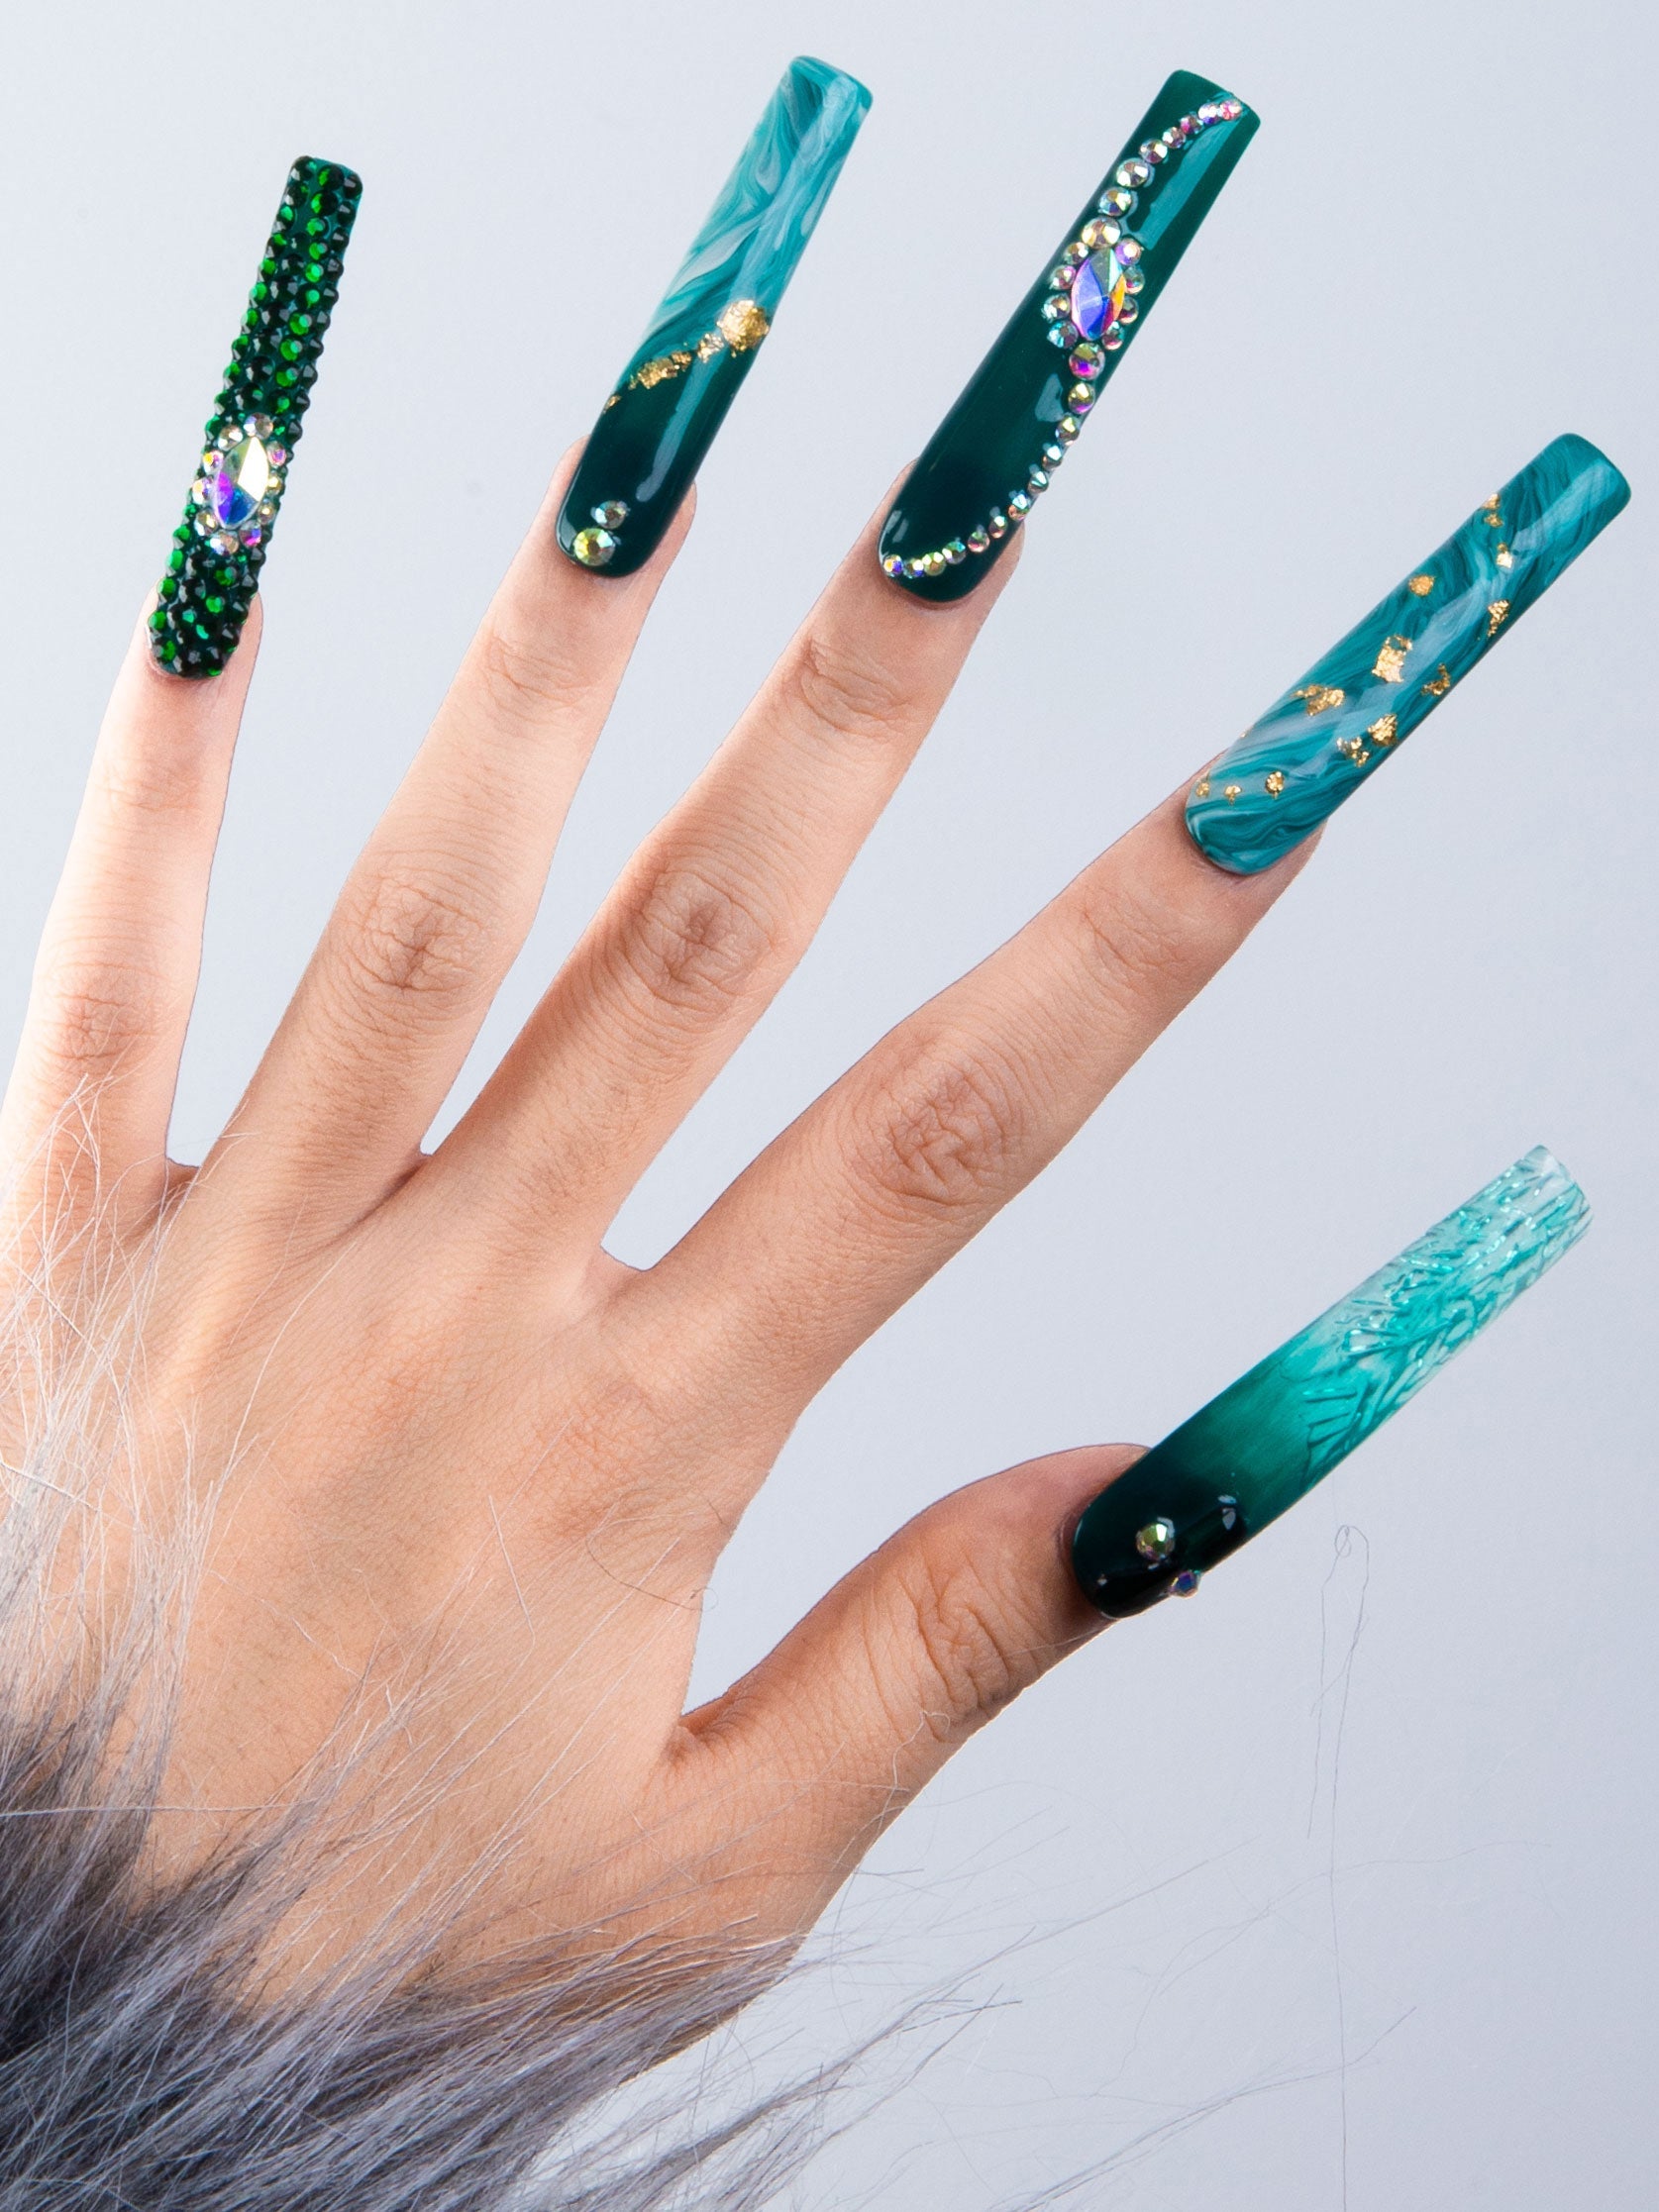 Hand showcasing Lovful.com's Emerald Envy press-on acrylic nails with intricate gold decor, rhinestones, and green liquid flow designs evoking lush foliage.